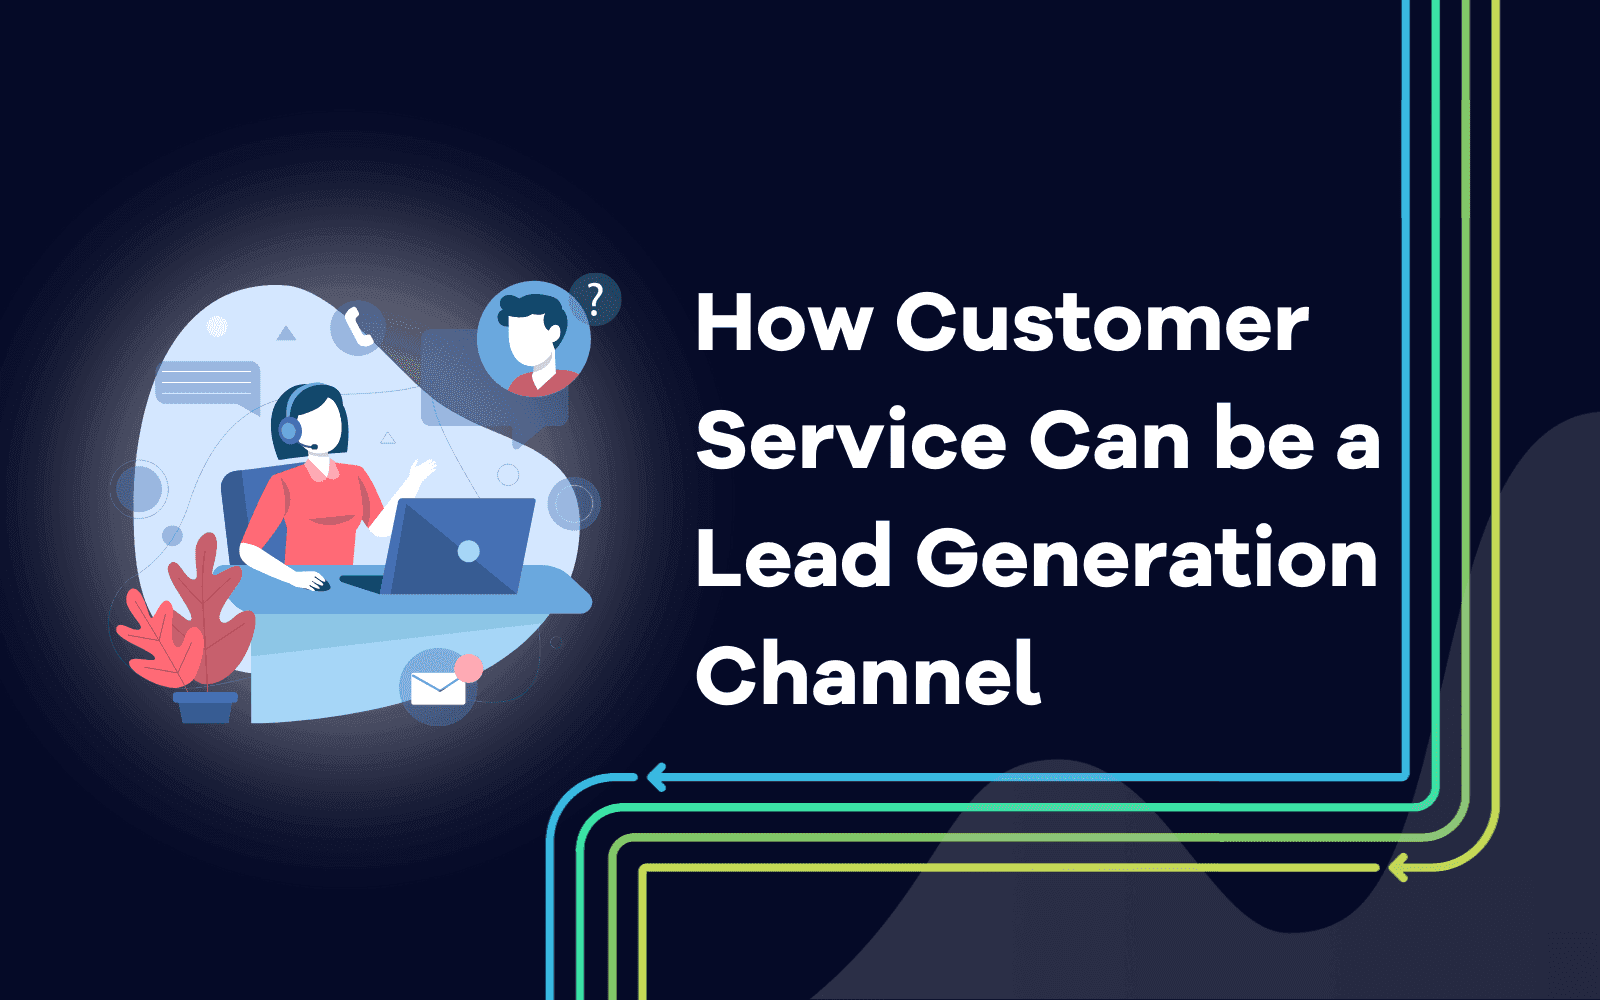 How Customer Service Can be a Lead Generation Channel